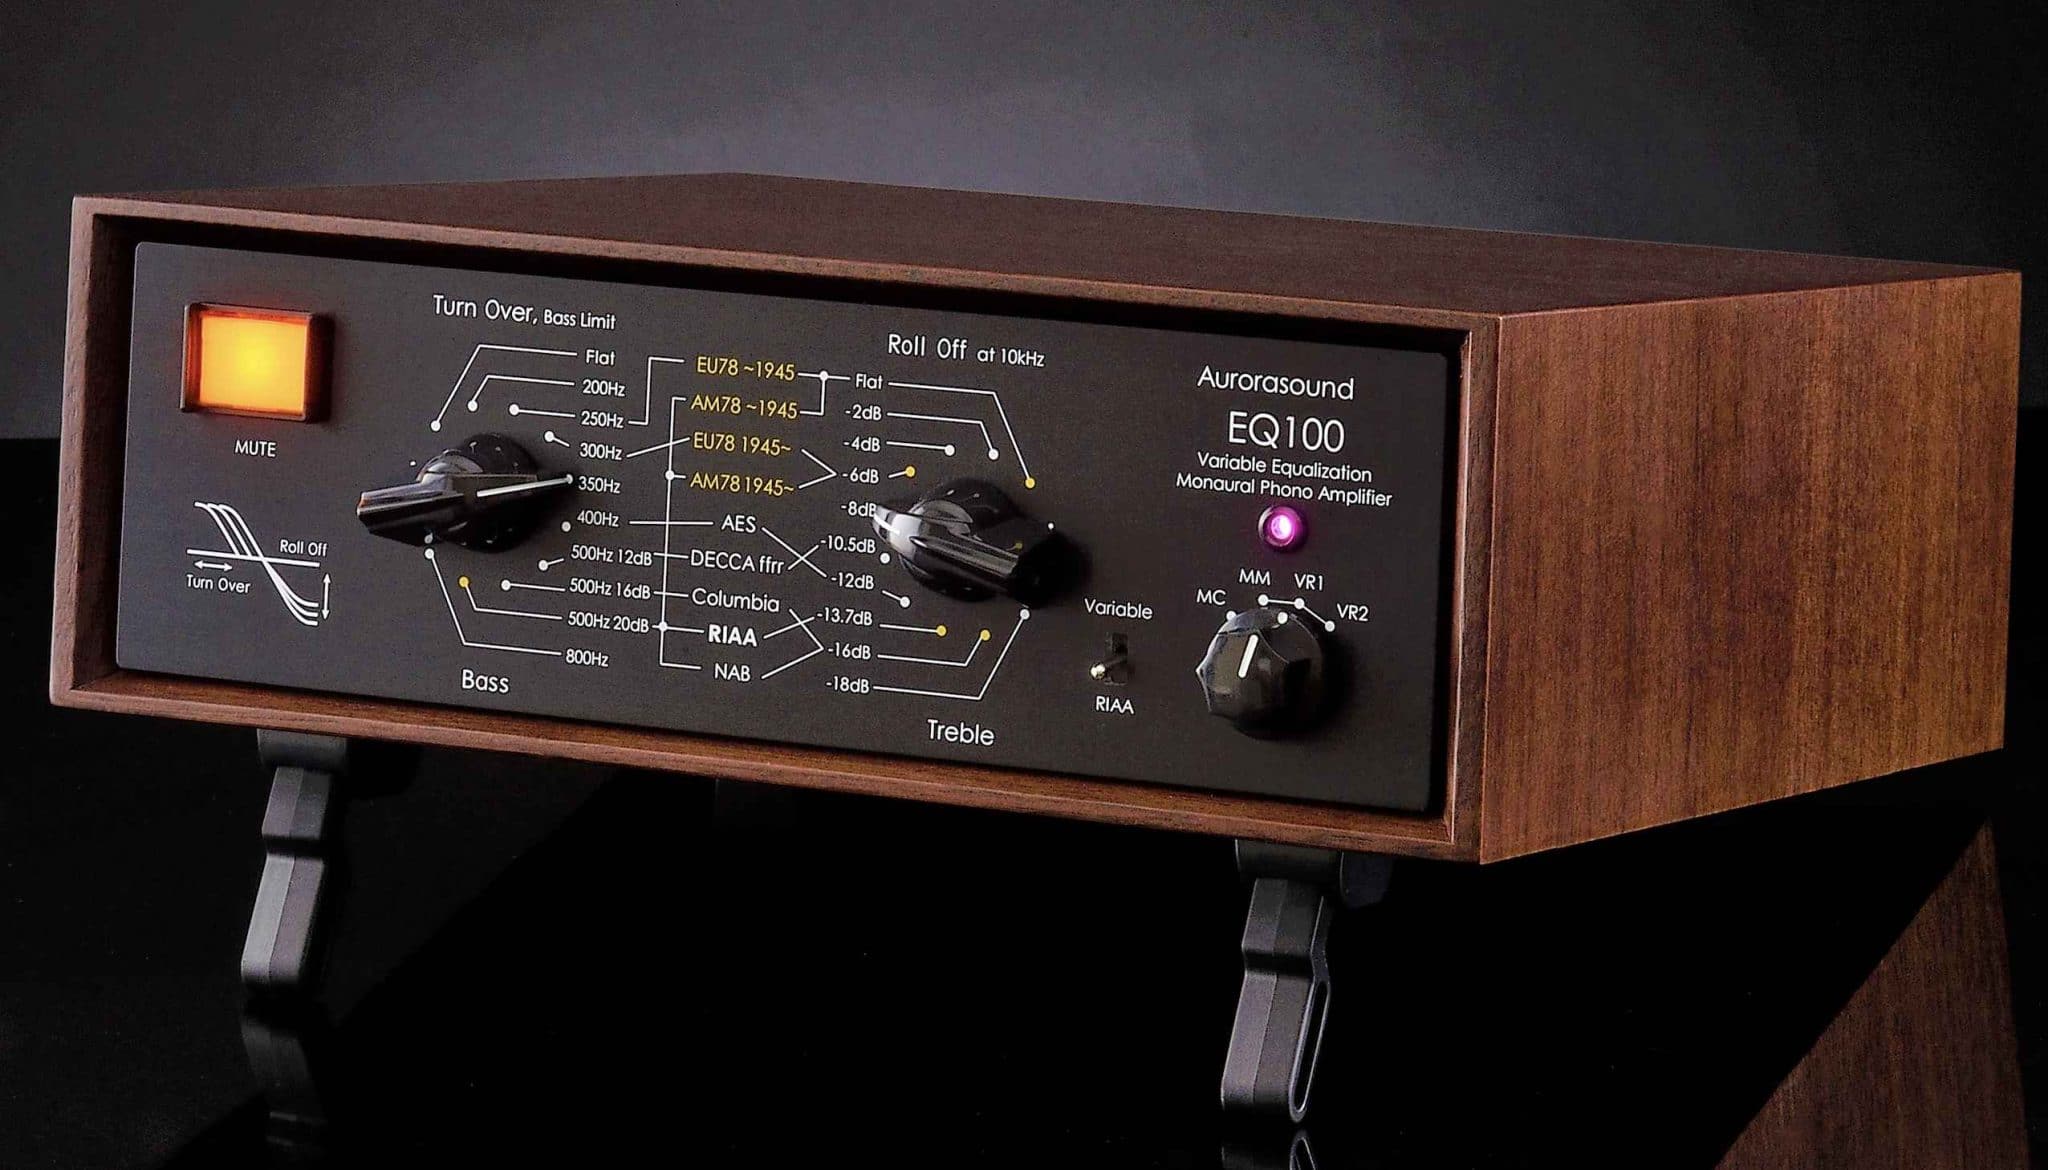 Aurorasound Offers the VIDA 2 and EQ-100 - The Audiophile Man